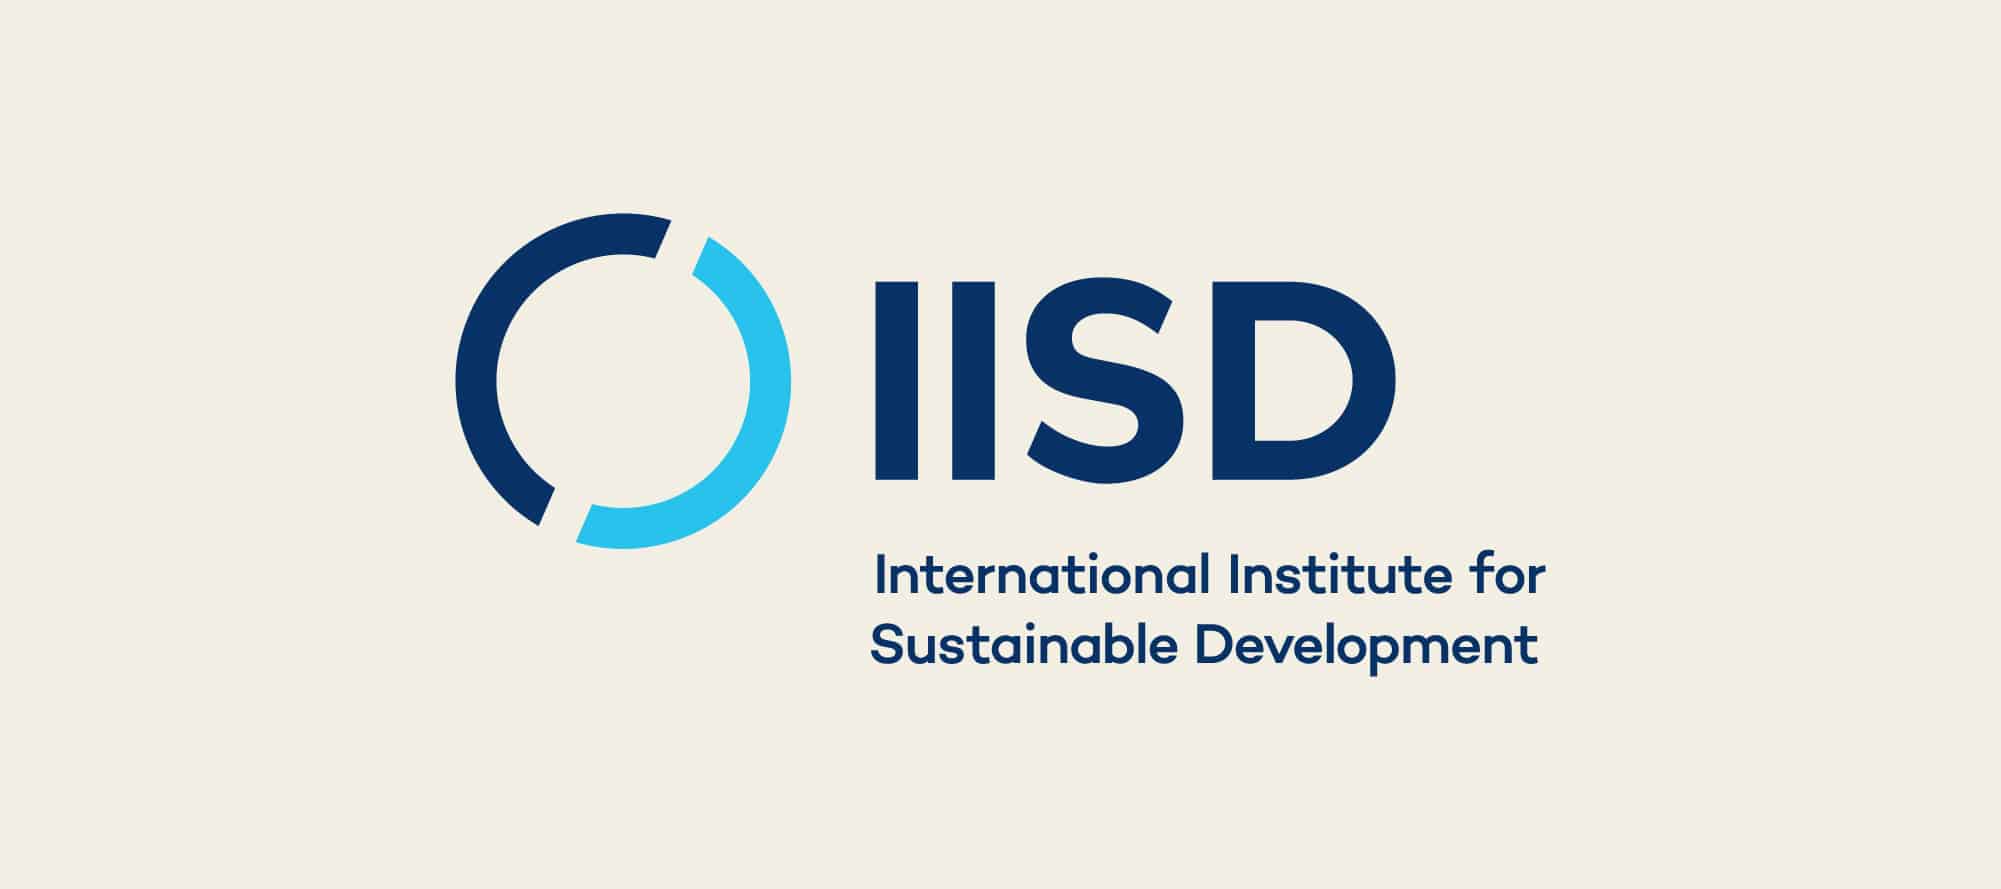 The nonprofit logo of IISD, which looks like the outline of Earth next to the organization’s initials.